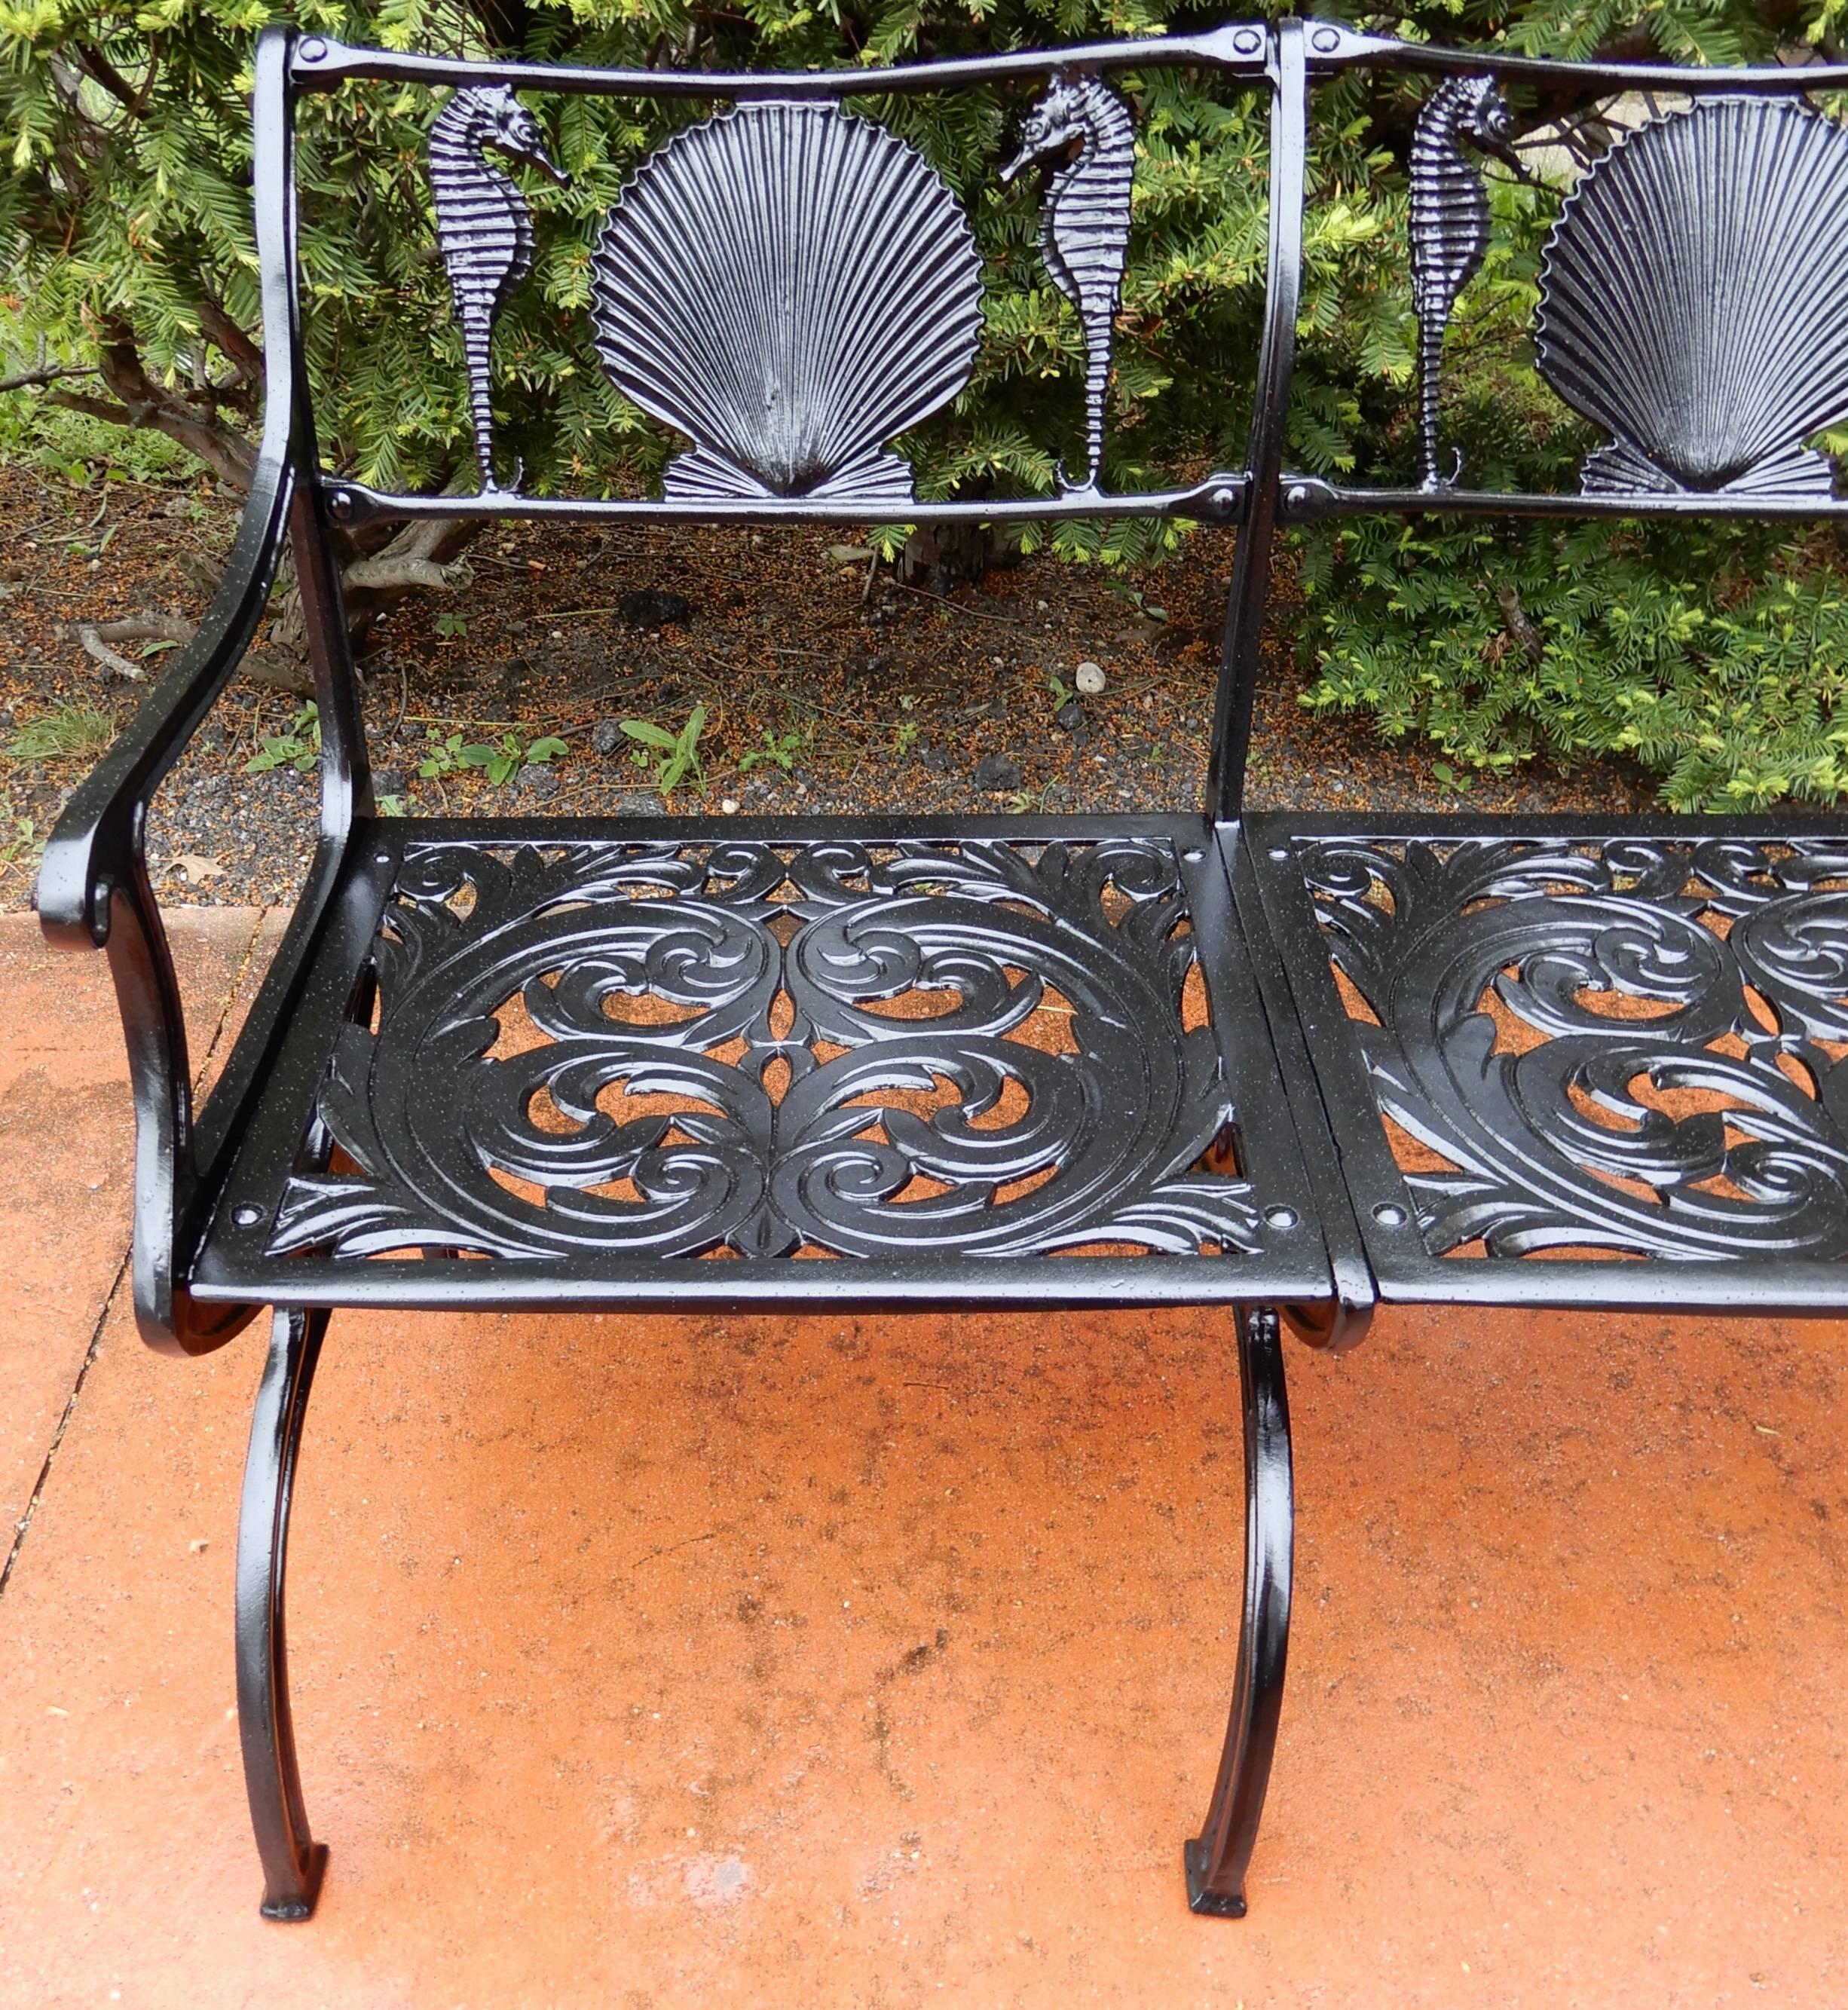 A cast aluminium garden bench by Molla in the shell and seahorse pattern. Molla is famous for making the shell and seahorse pattern for the garden. This desireable pattern furnished the patio gardens of the famous Breakers Hotel in Palm Beach. It